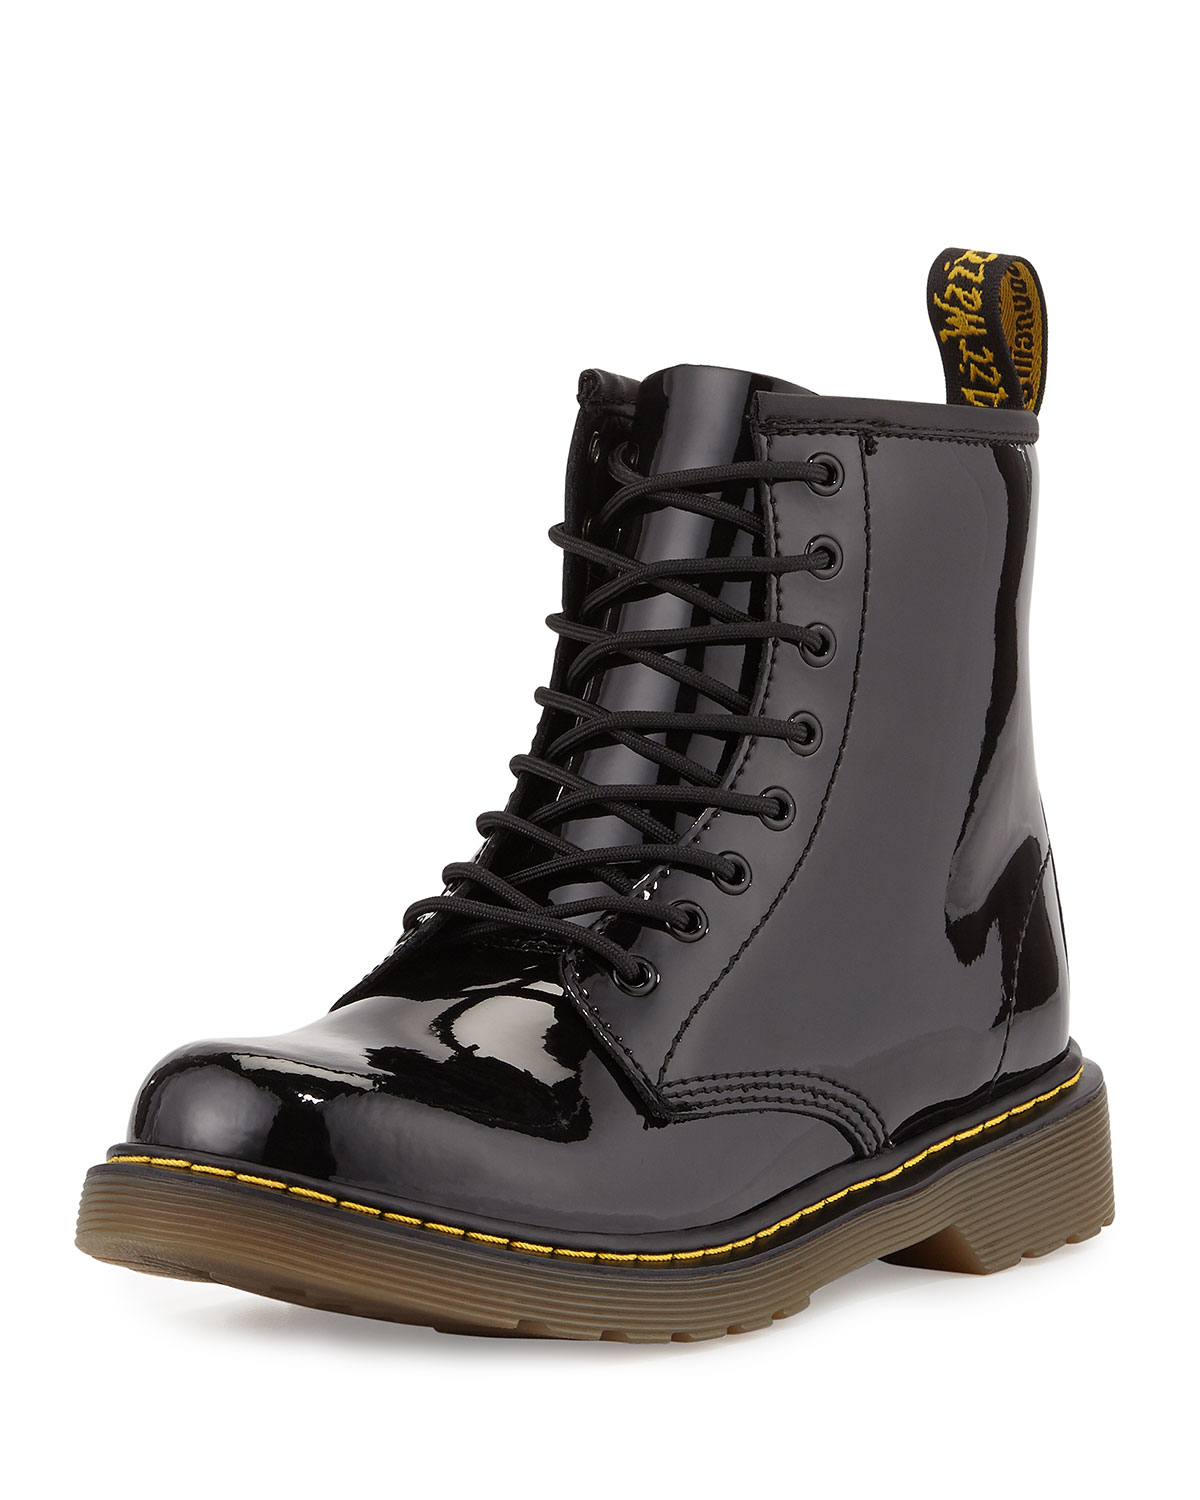 Lyst - Dr. Martens Delaney Patent-Leather Military Boots in Black